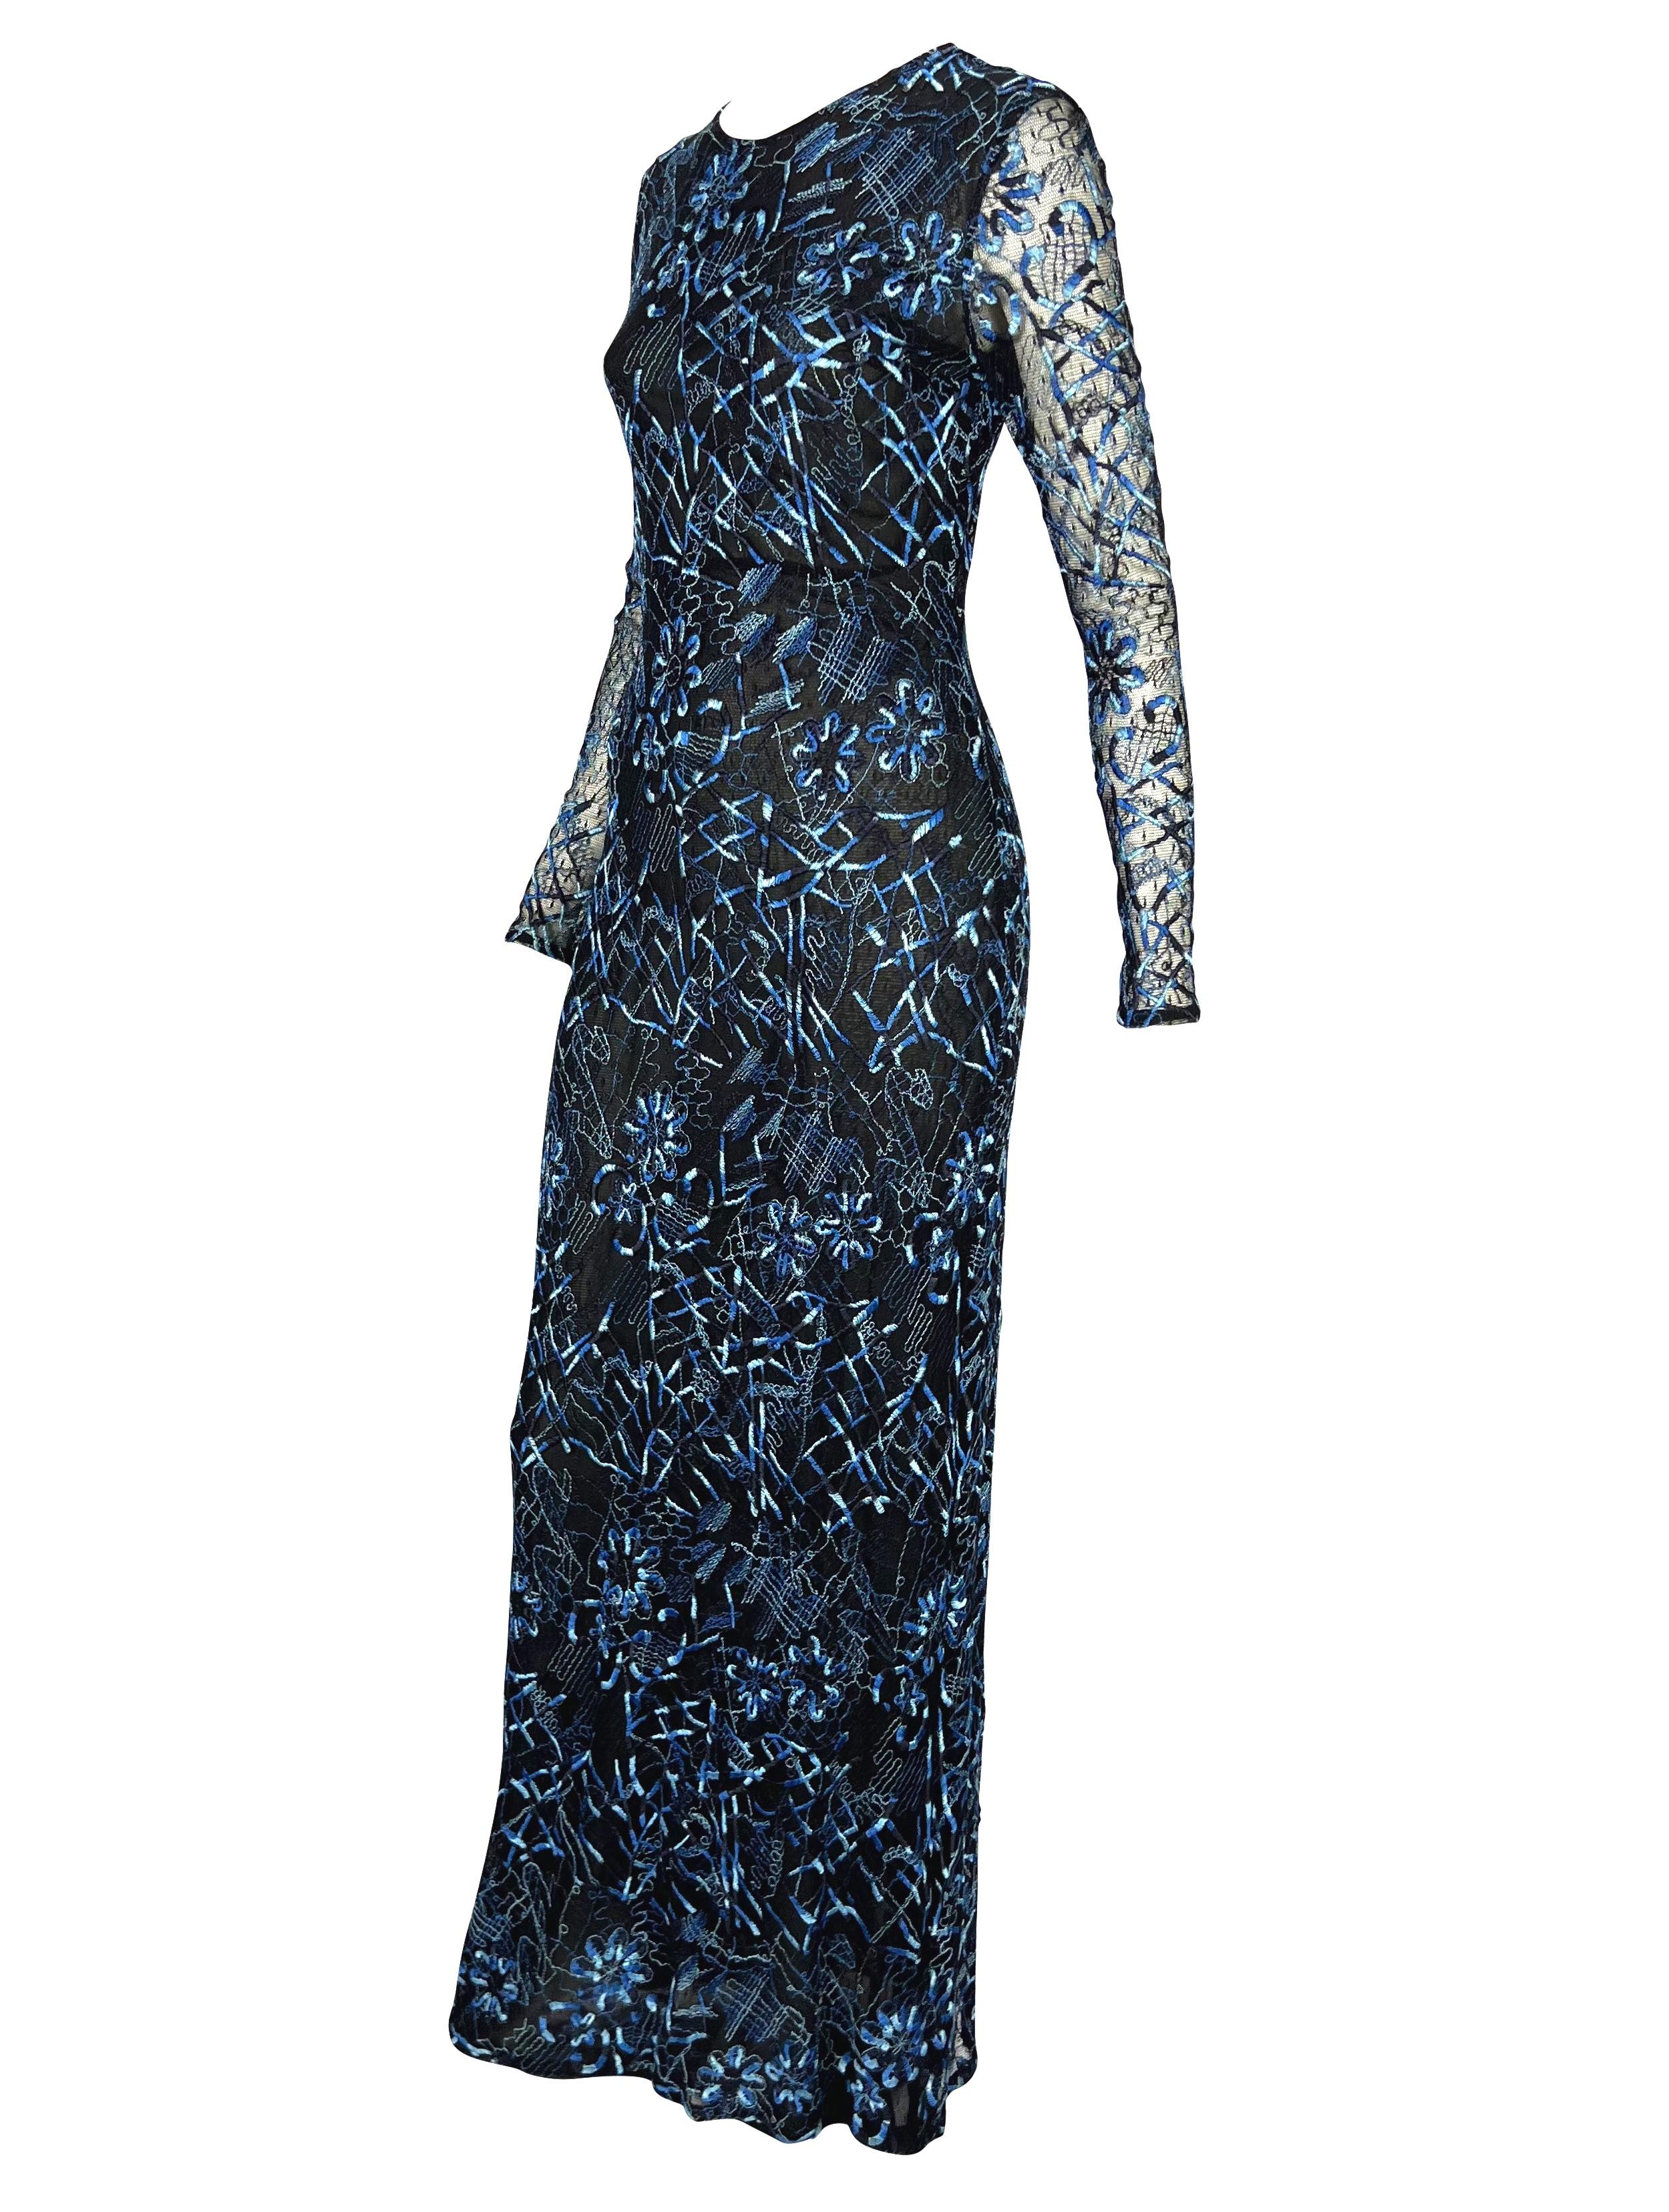 Women's S/S 1998 Christian Lacroix Black Stretch Sheer Mesh Blue Embroidered Maxi Dress For Sale